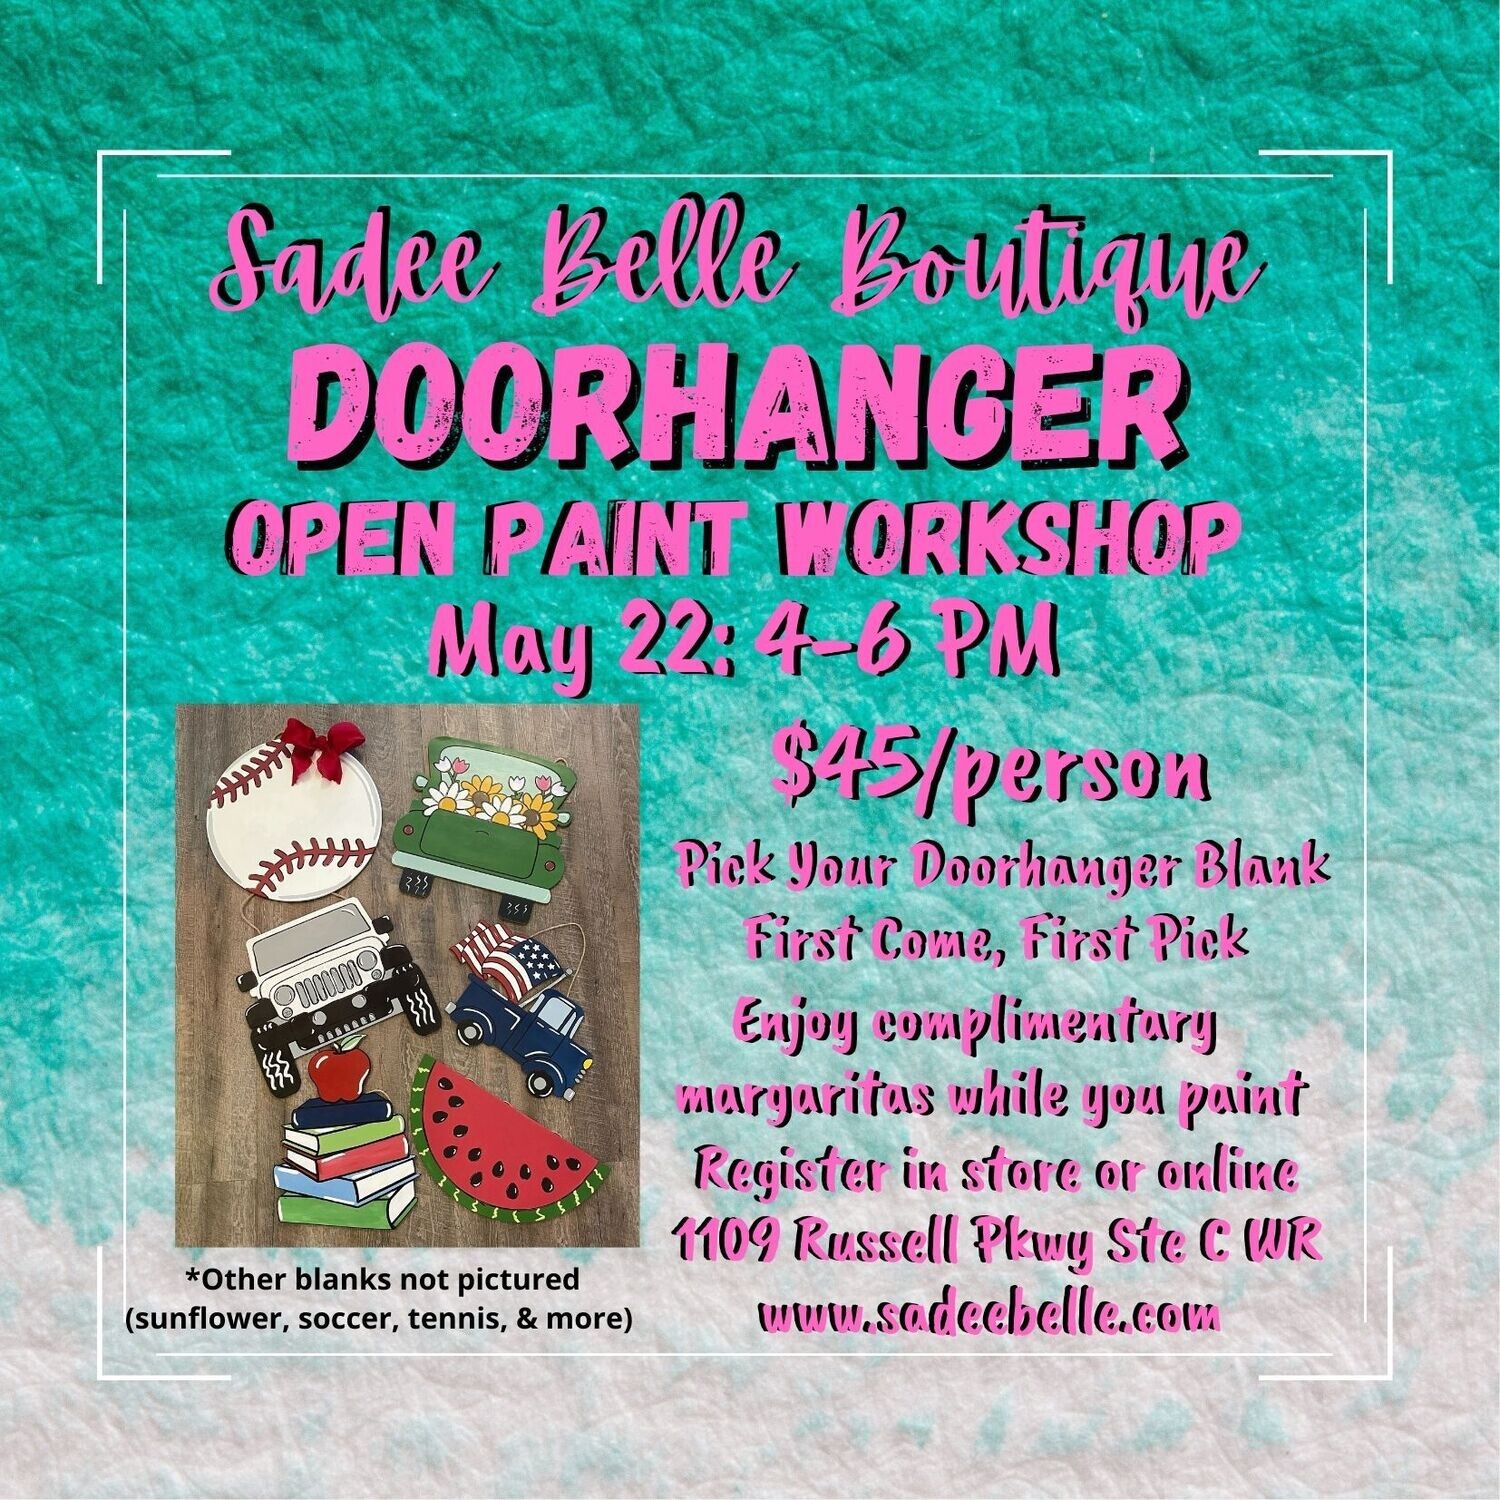 May 22, 4-6PM, Open Paint Workshop